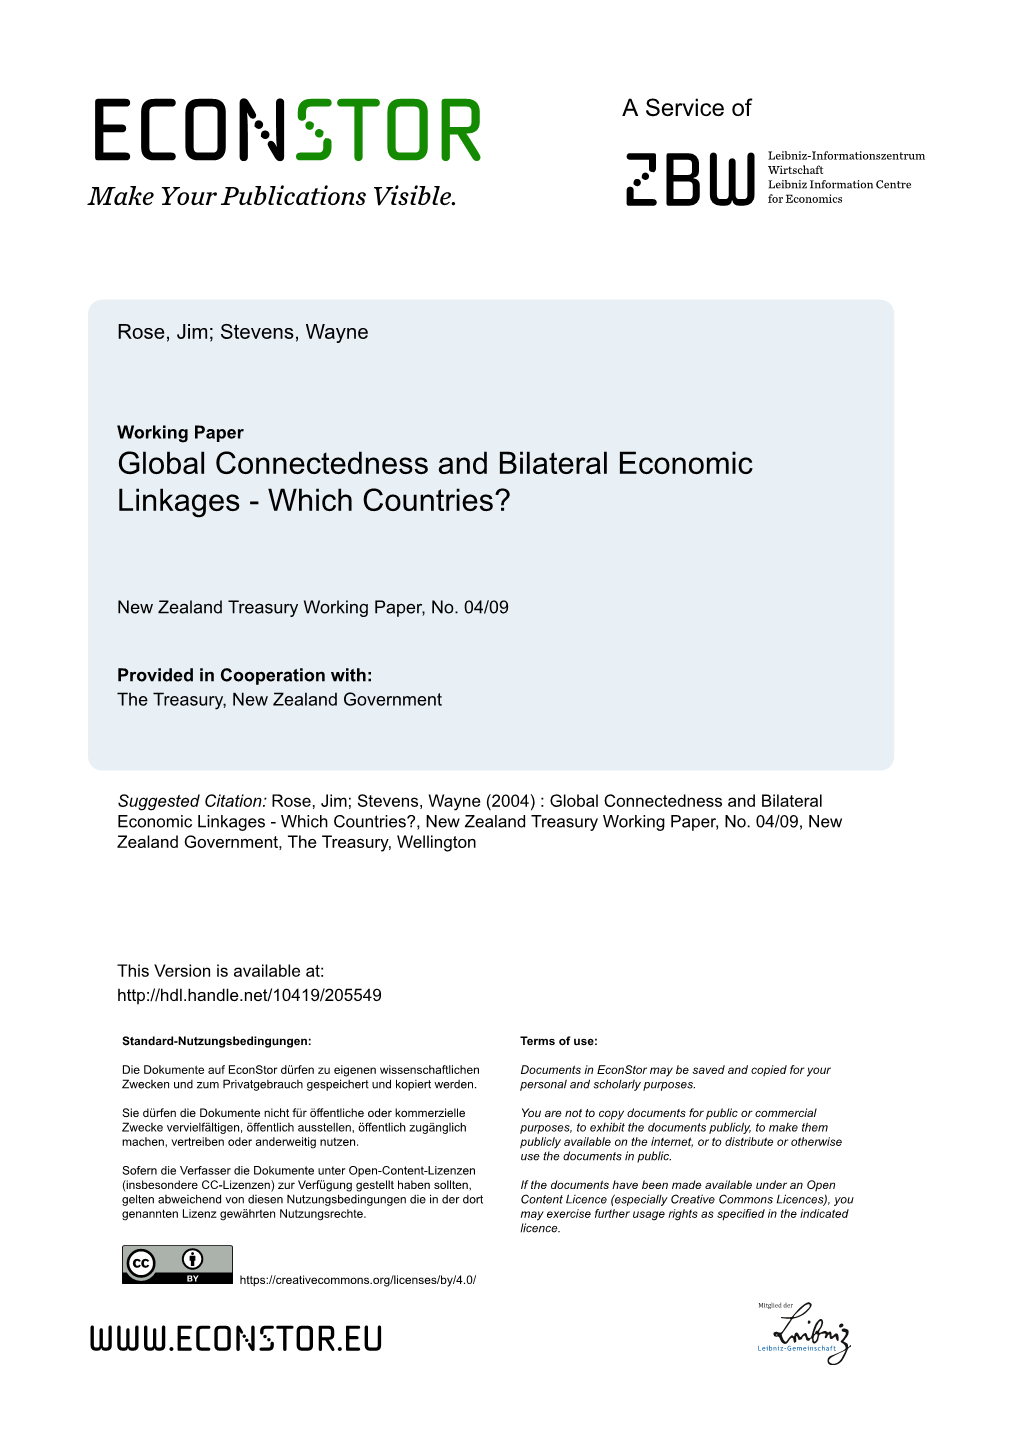 Global Connectedness and Bilateral Economic Linkages - Which Countries?